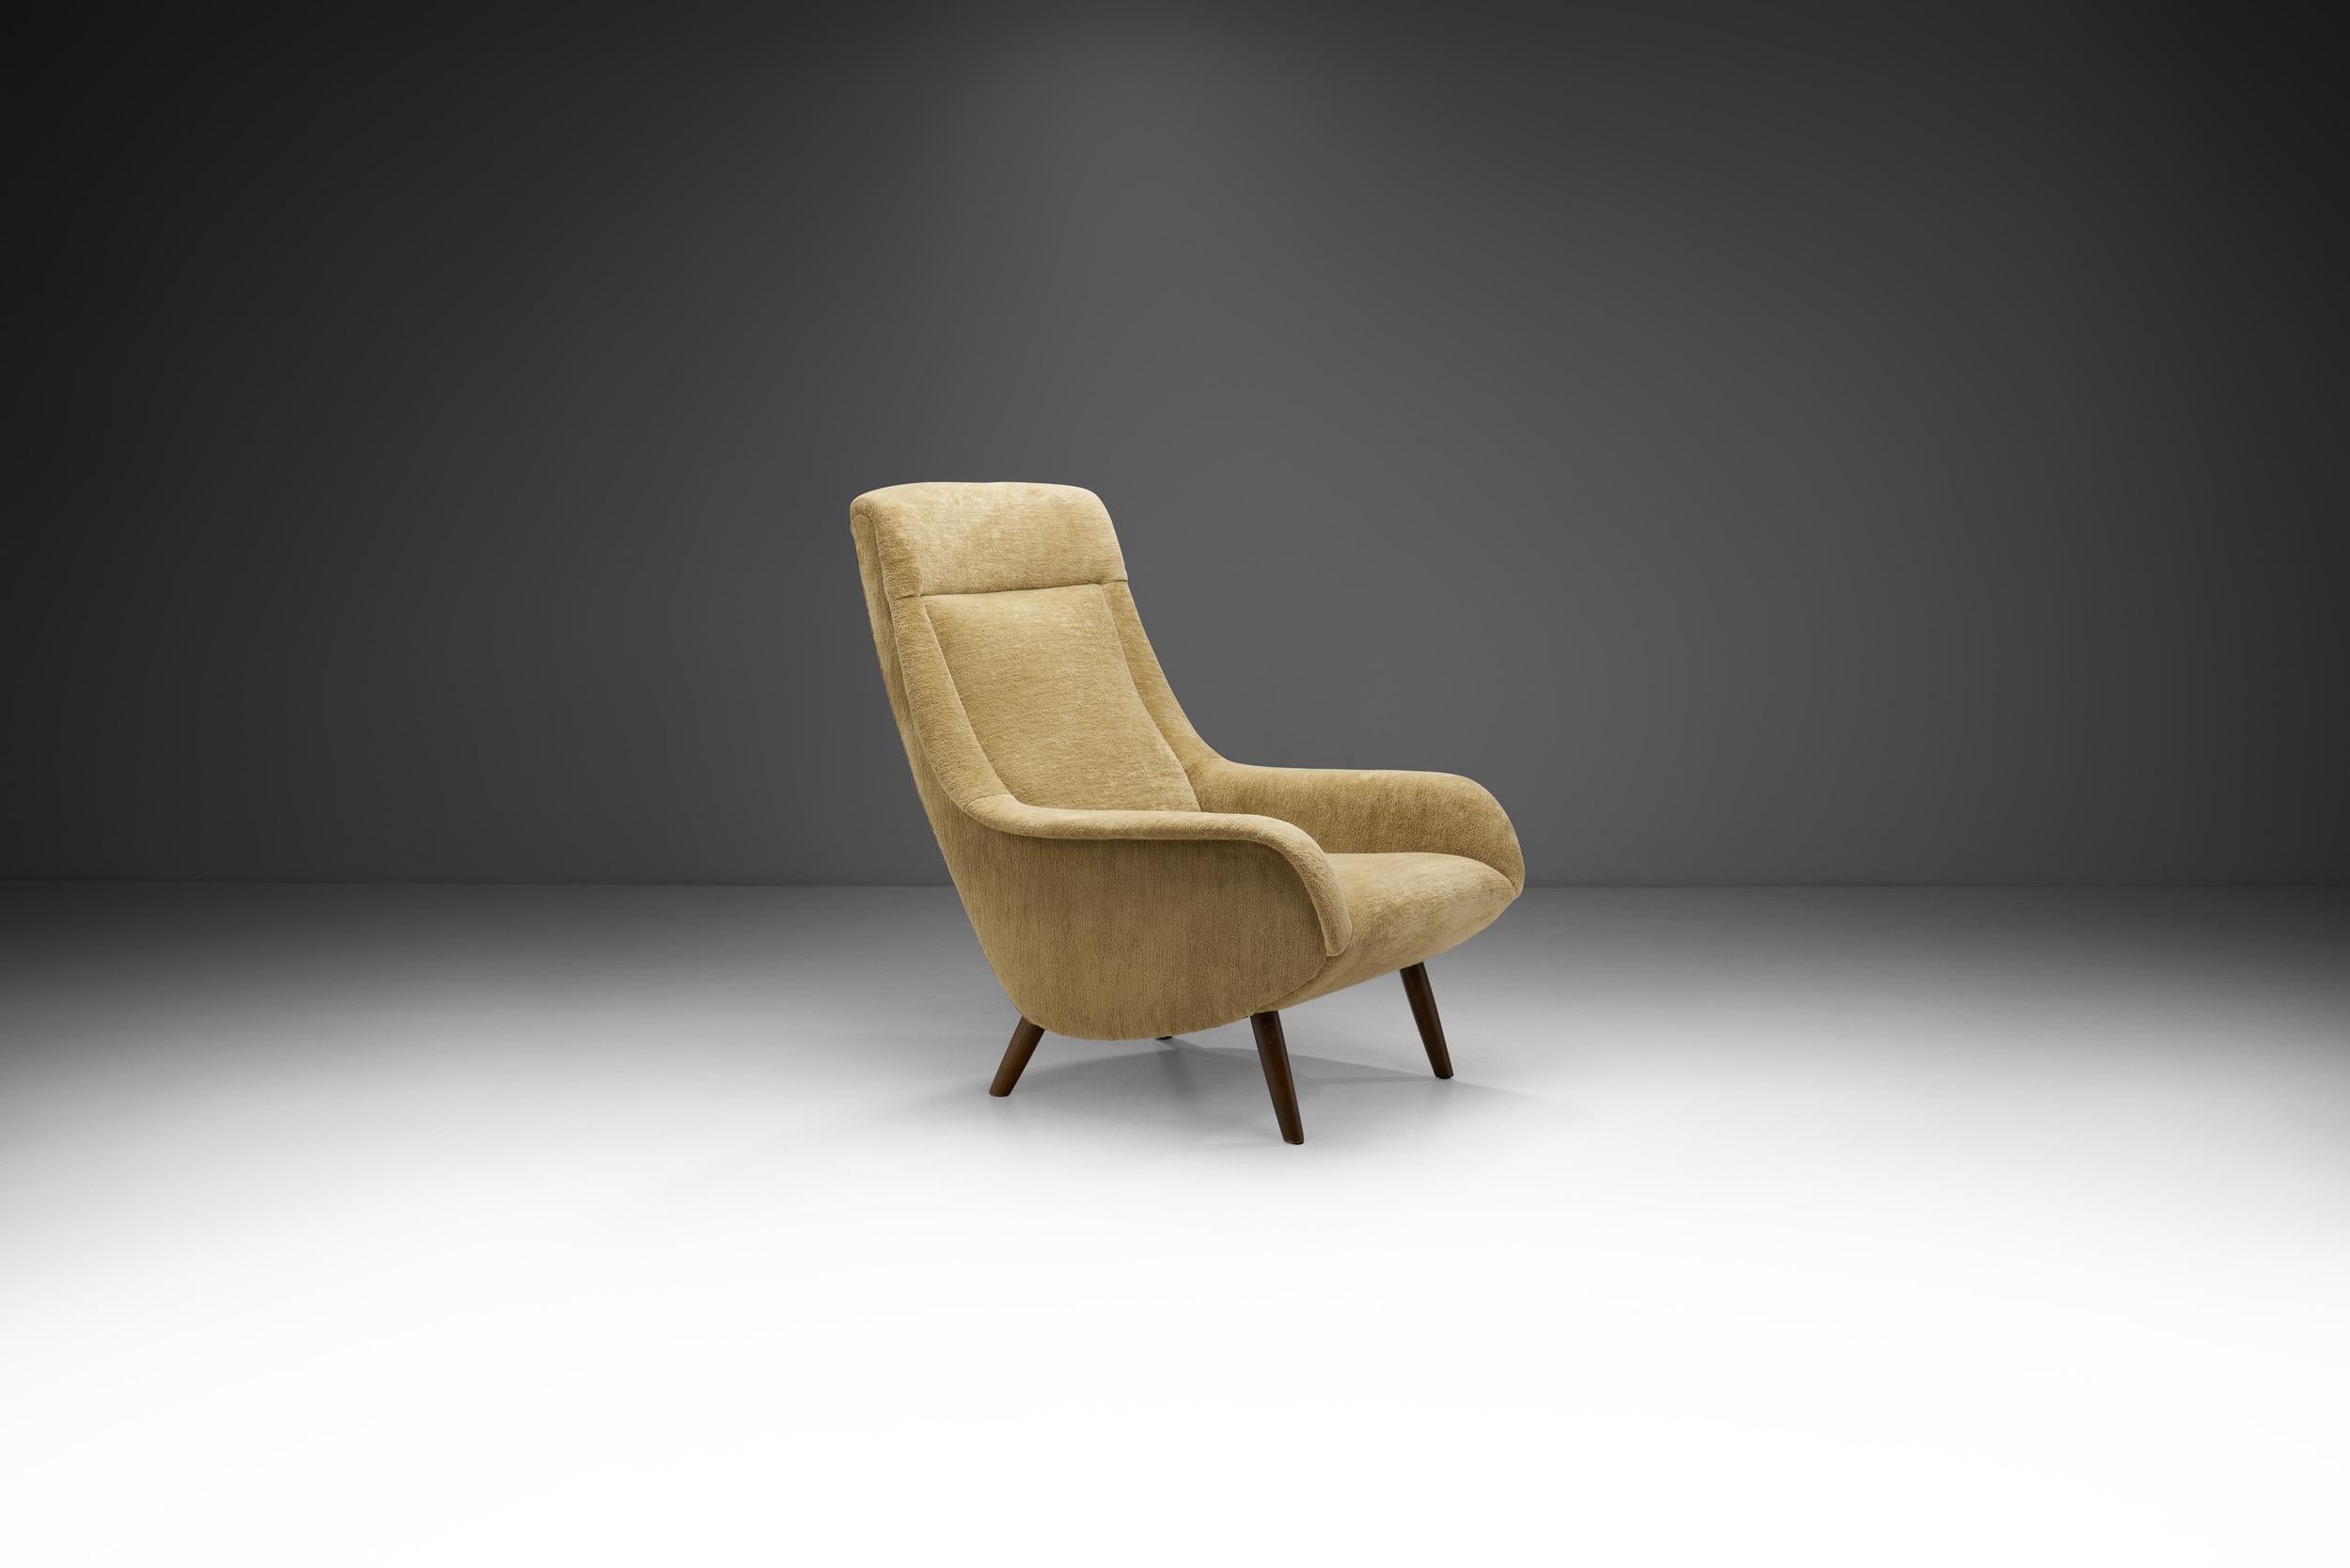 Mid-20th Century European Mid-Century Modern Lounge Chair with Beech Wood Legs, Europe 1960s For Sale